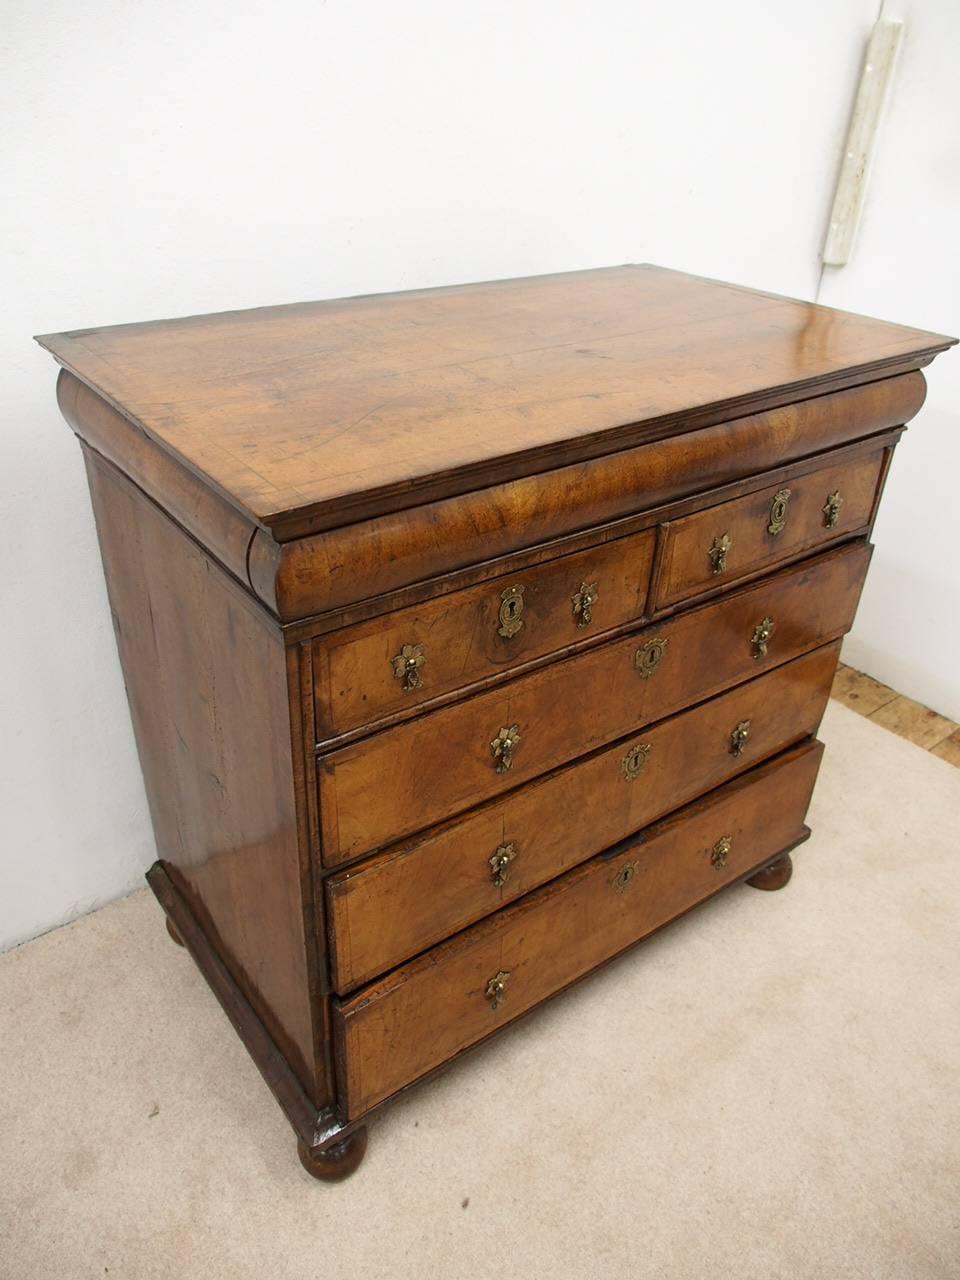 George I walnut chest of drawers with crossbanded top and sides, circa 1720. The rectangular top sits above a shaped moulding and deep cushion frieze with a long hidden drawer in front. Above two short and three long drawers with lovely herringbone